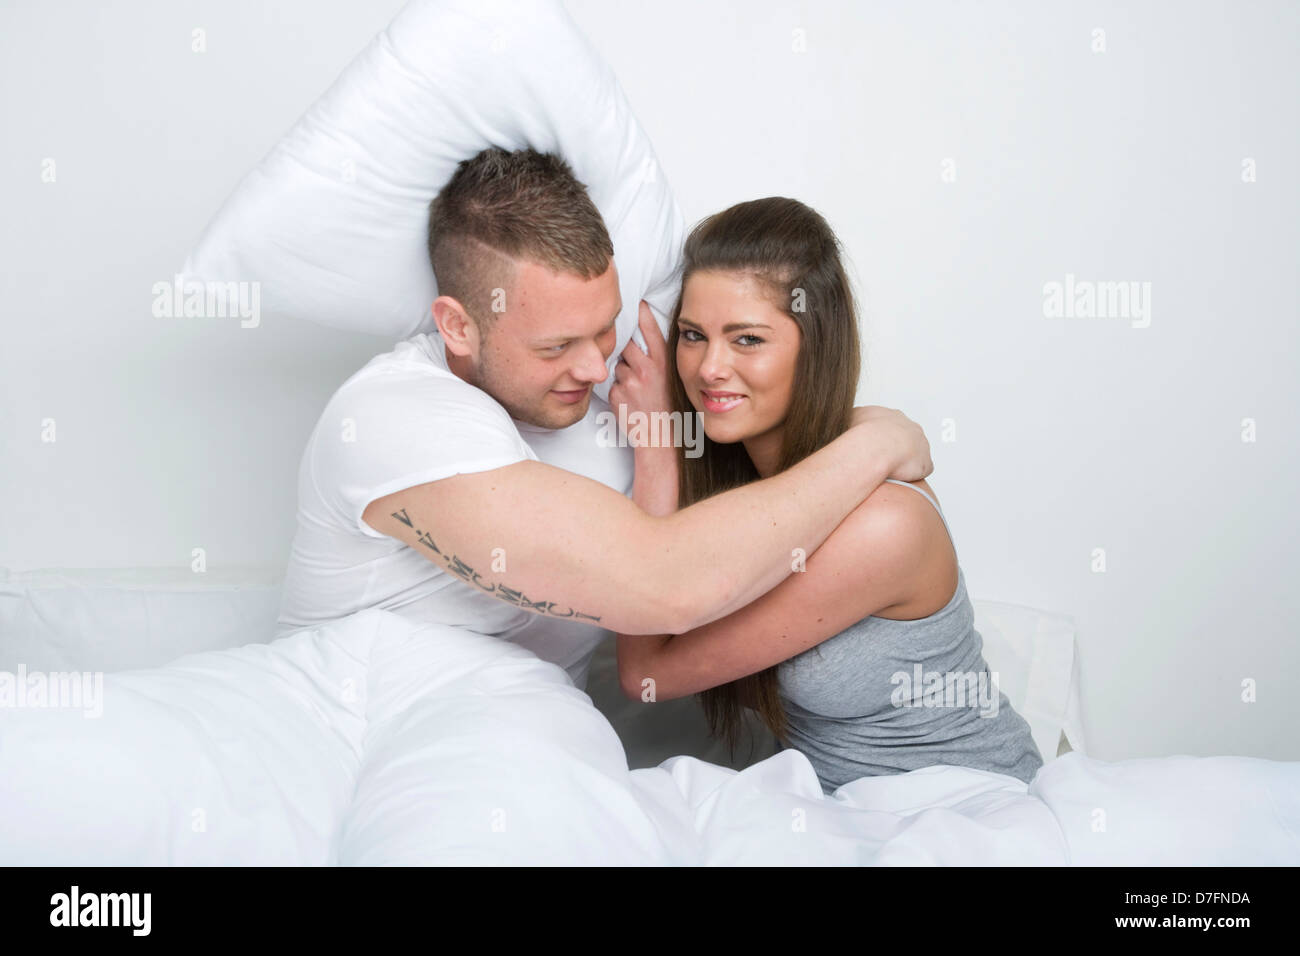 Young couple play fighting in bed. Stock Photo